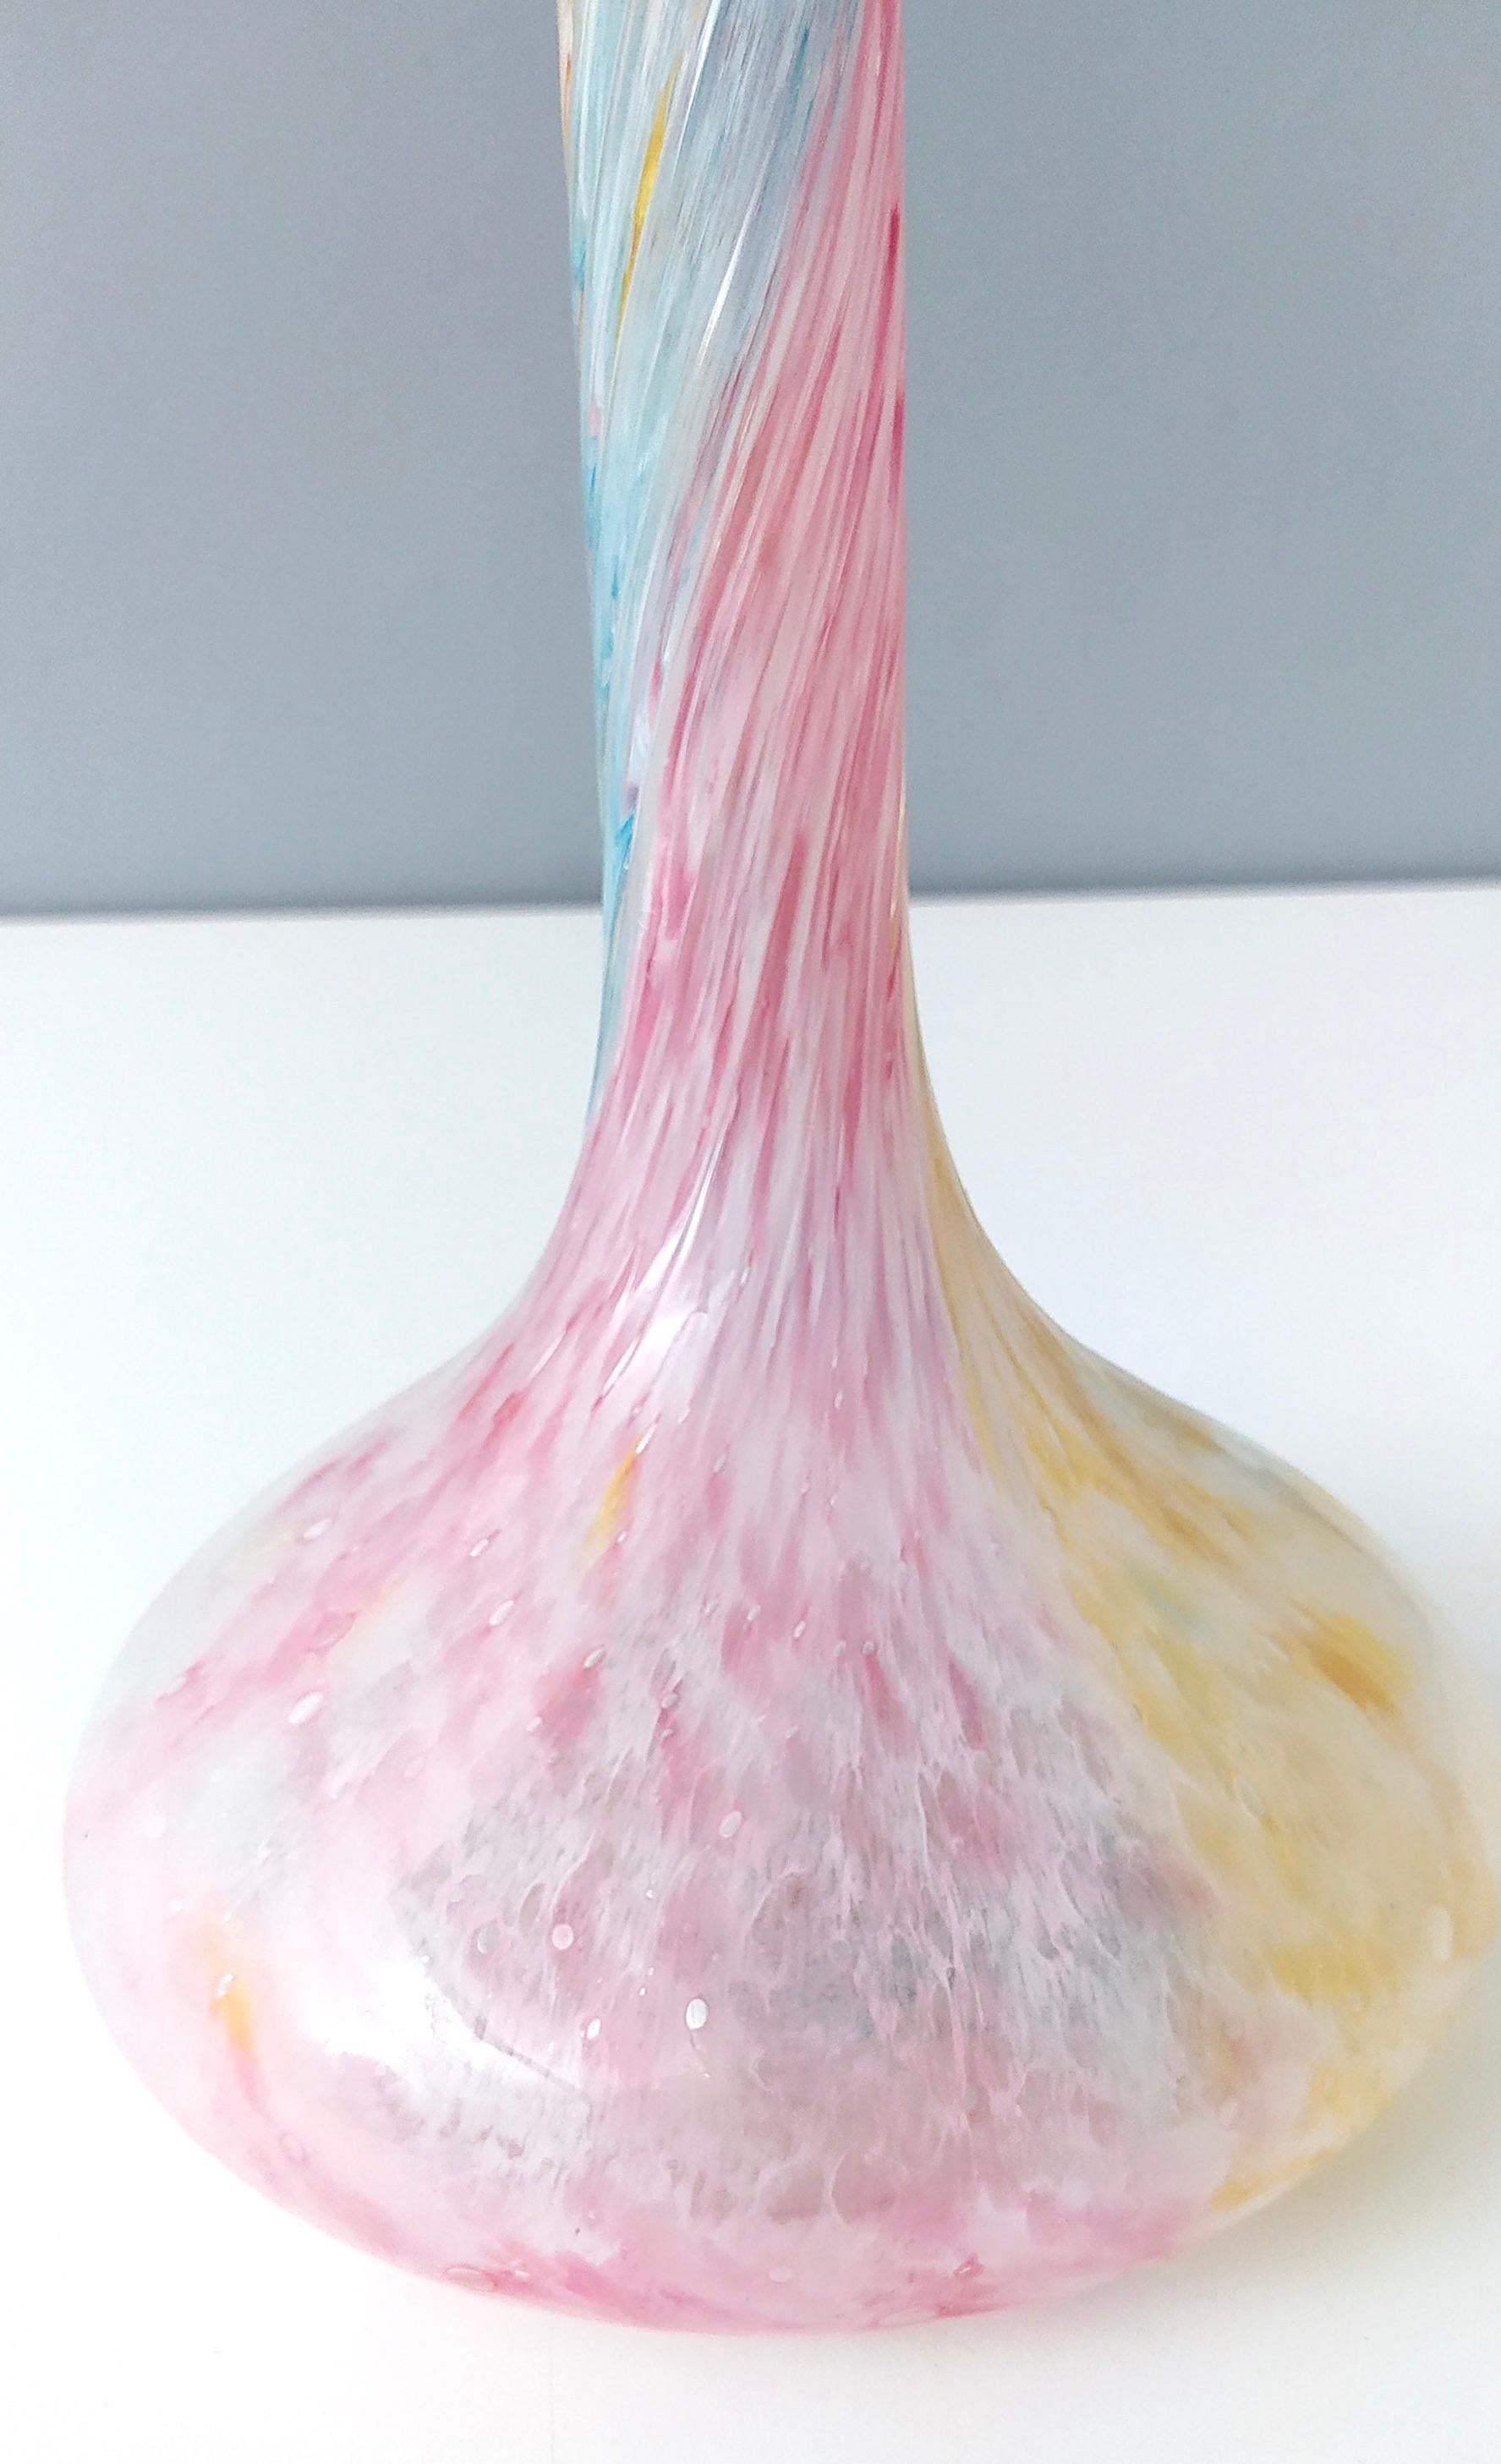 Mid-20th Century Vintage Pastel Colors Polychrome Murano Glass Flower Vase, Italy For Sale